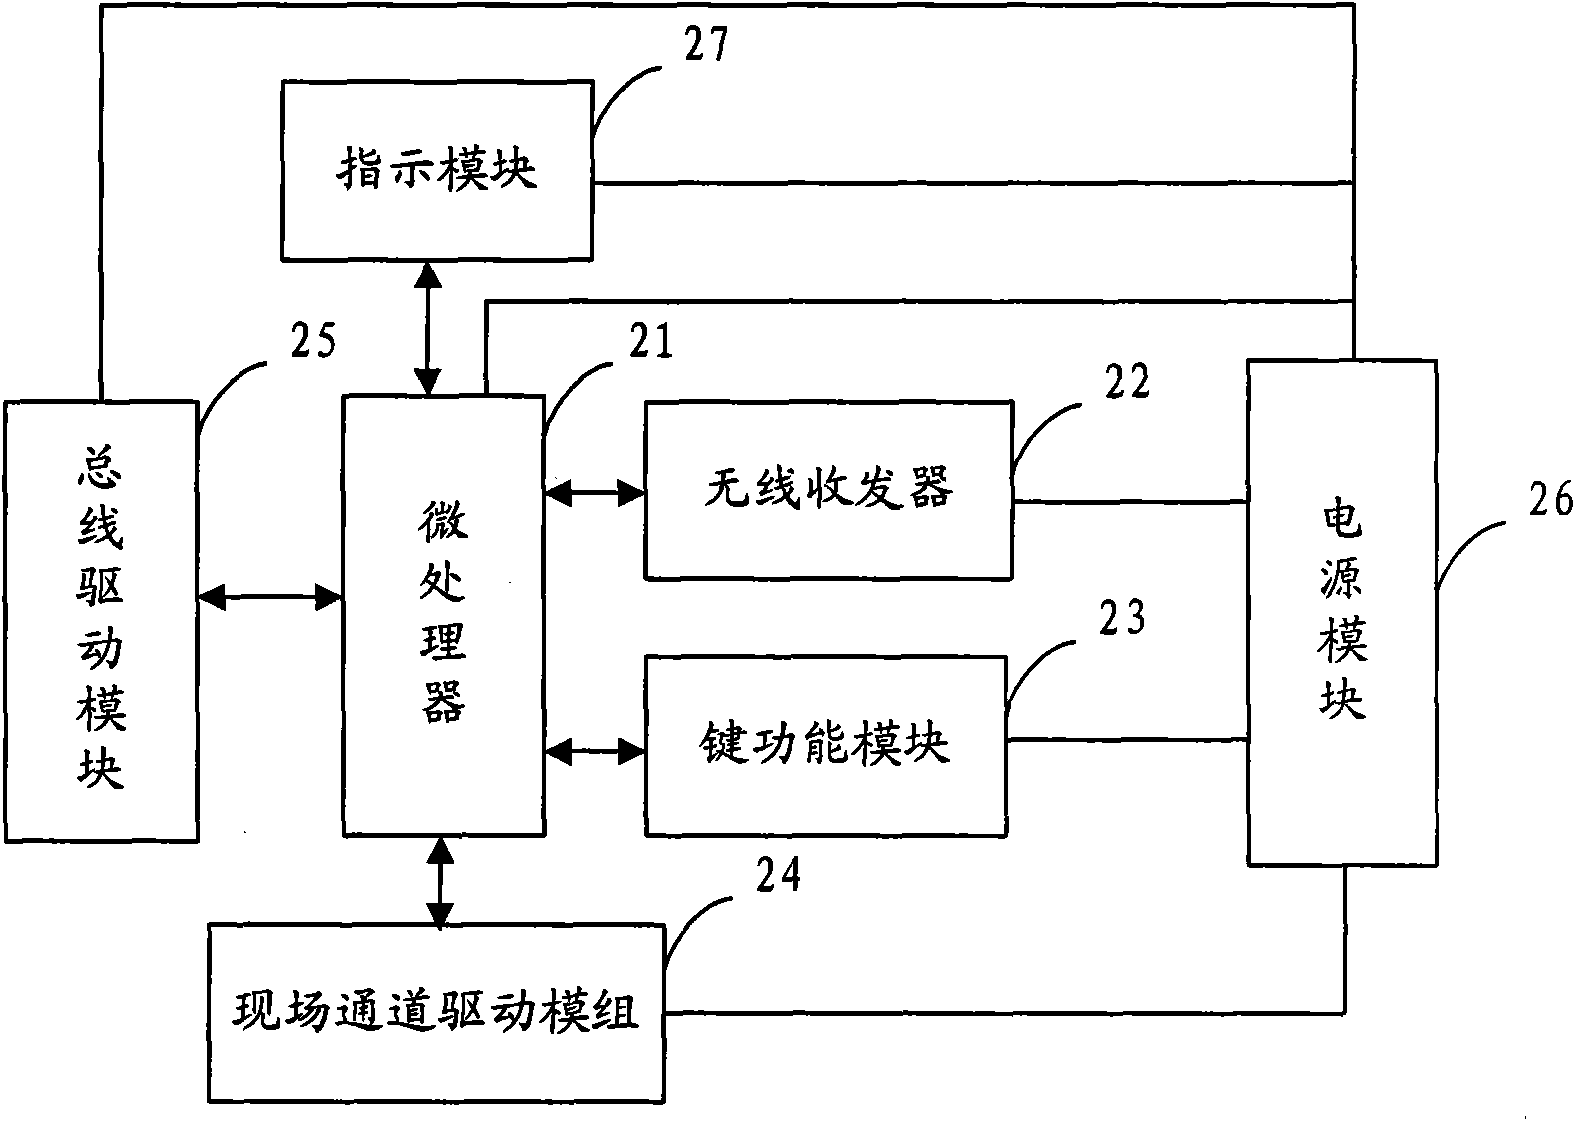 Concentrated-distributed wireless control system and controller